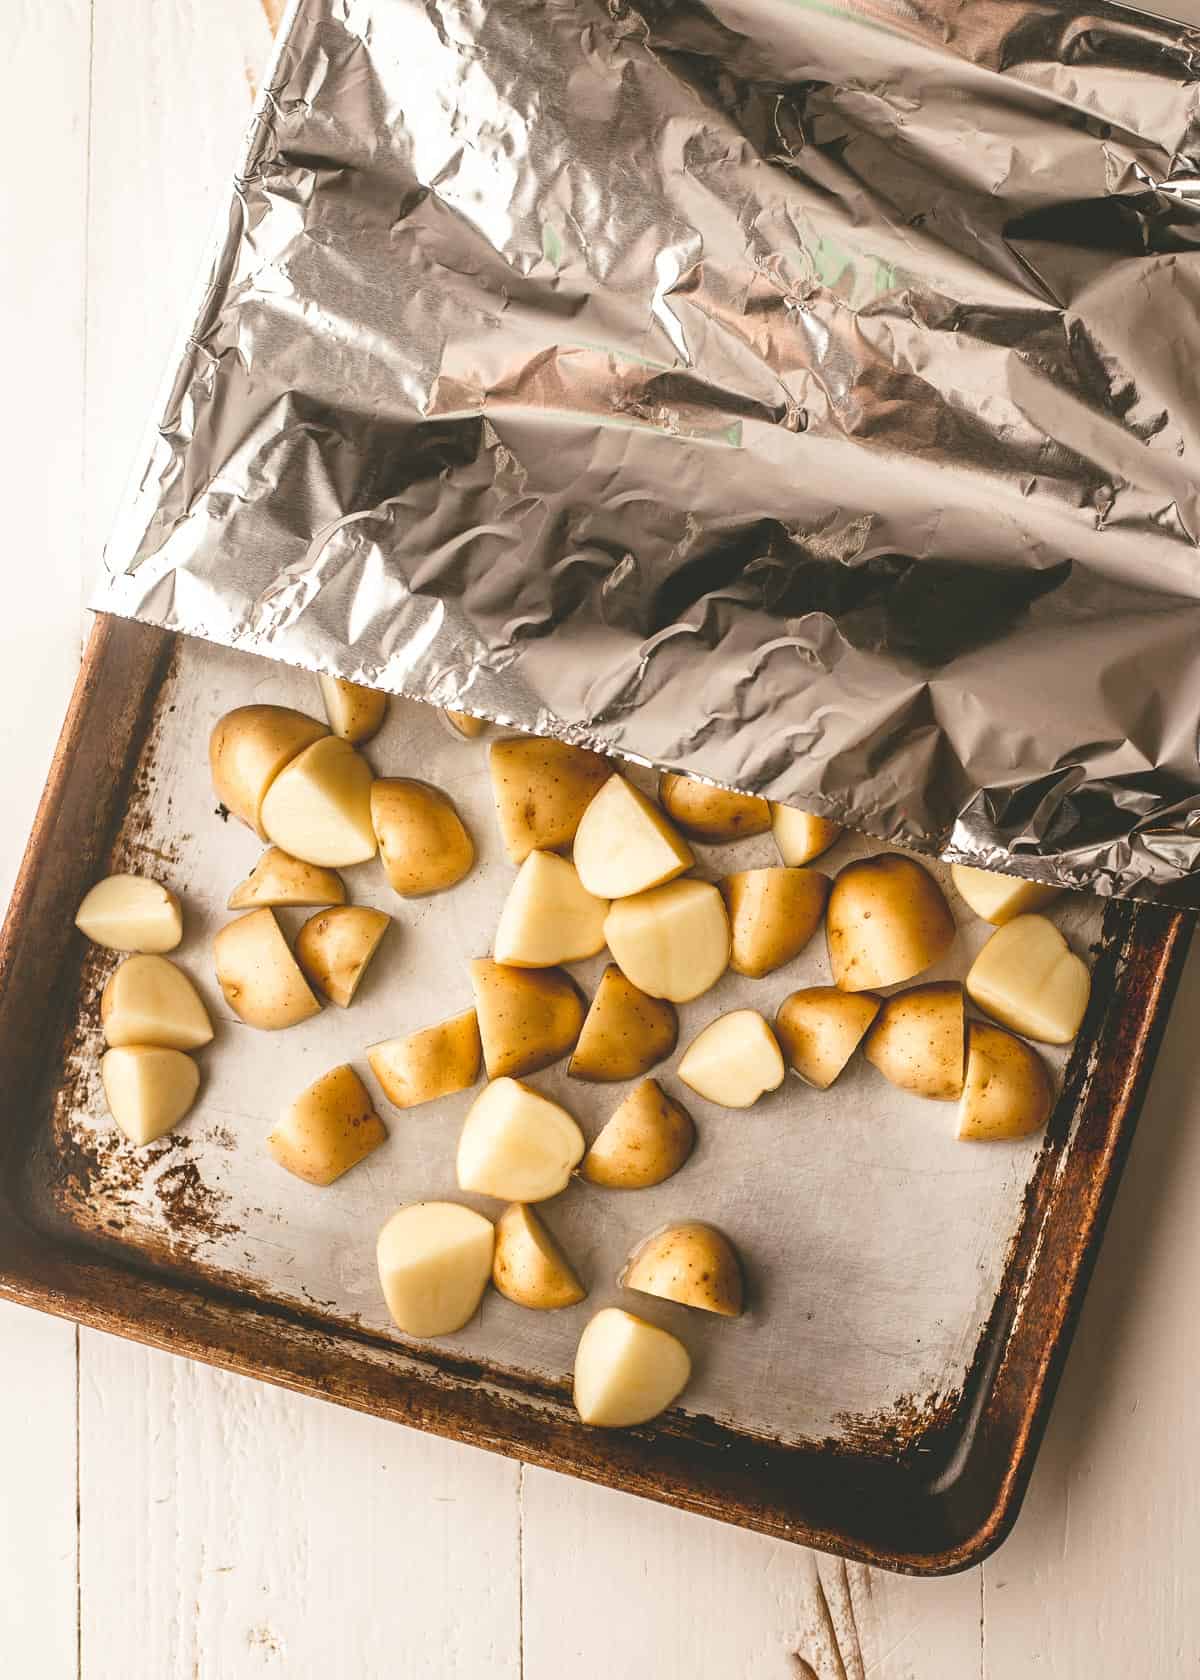 diced potatoes on a sheet pan covered in foil